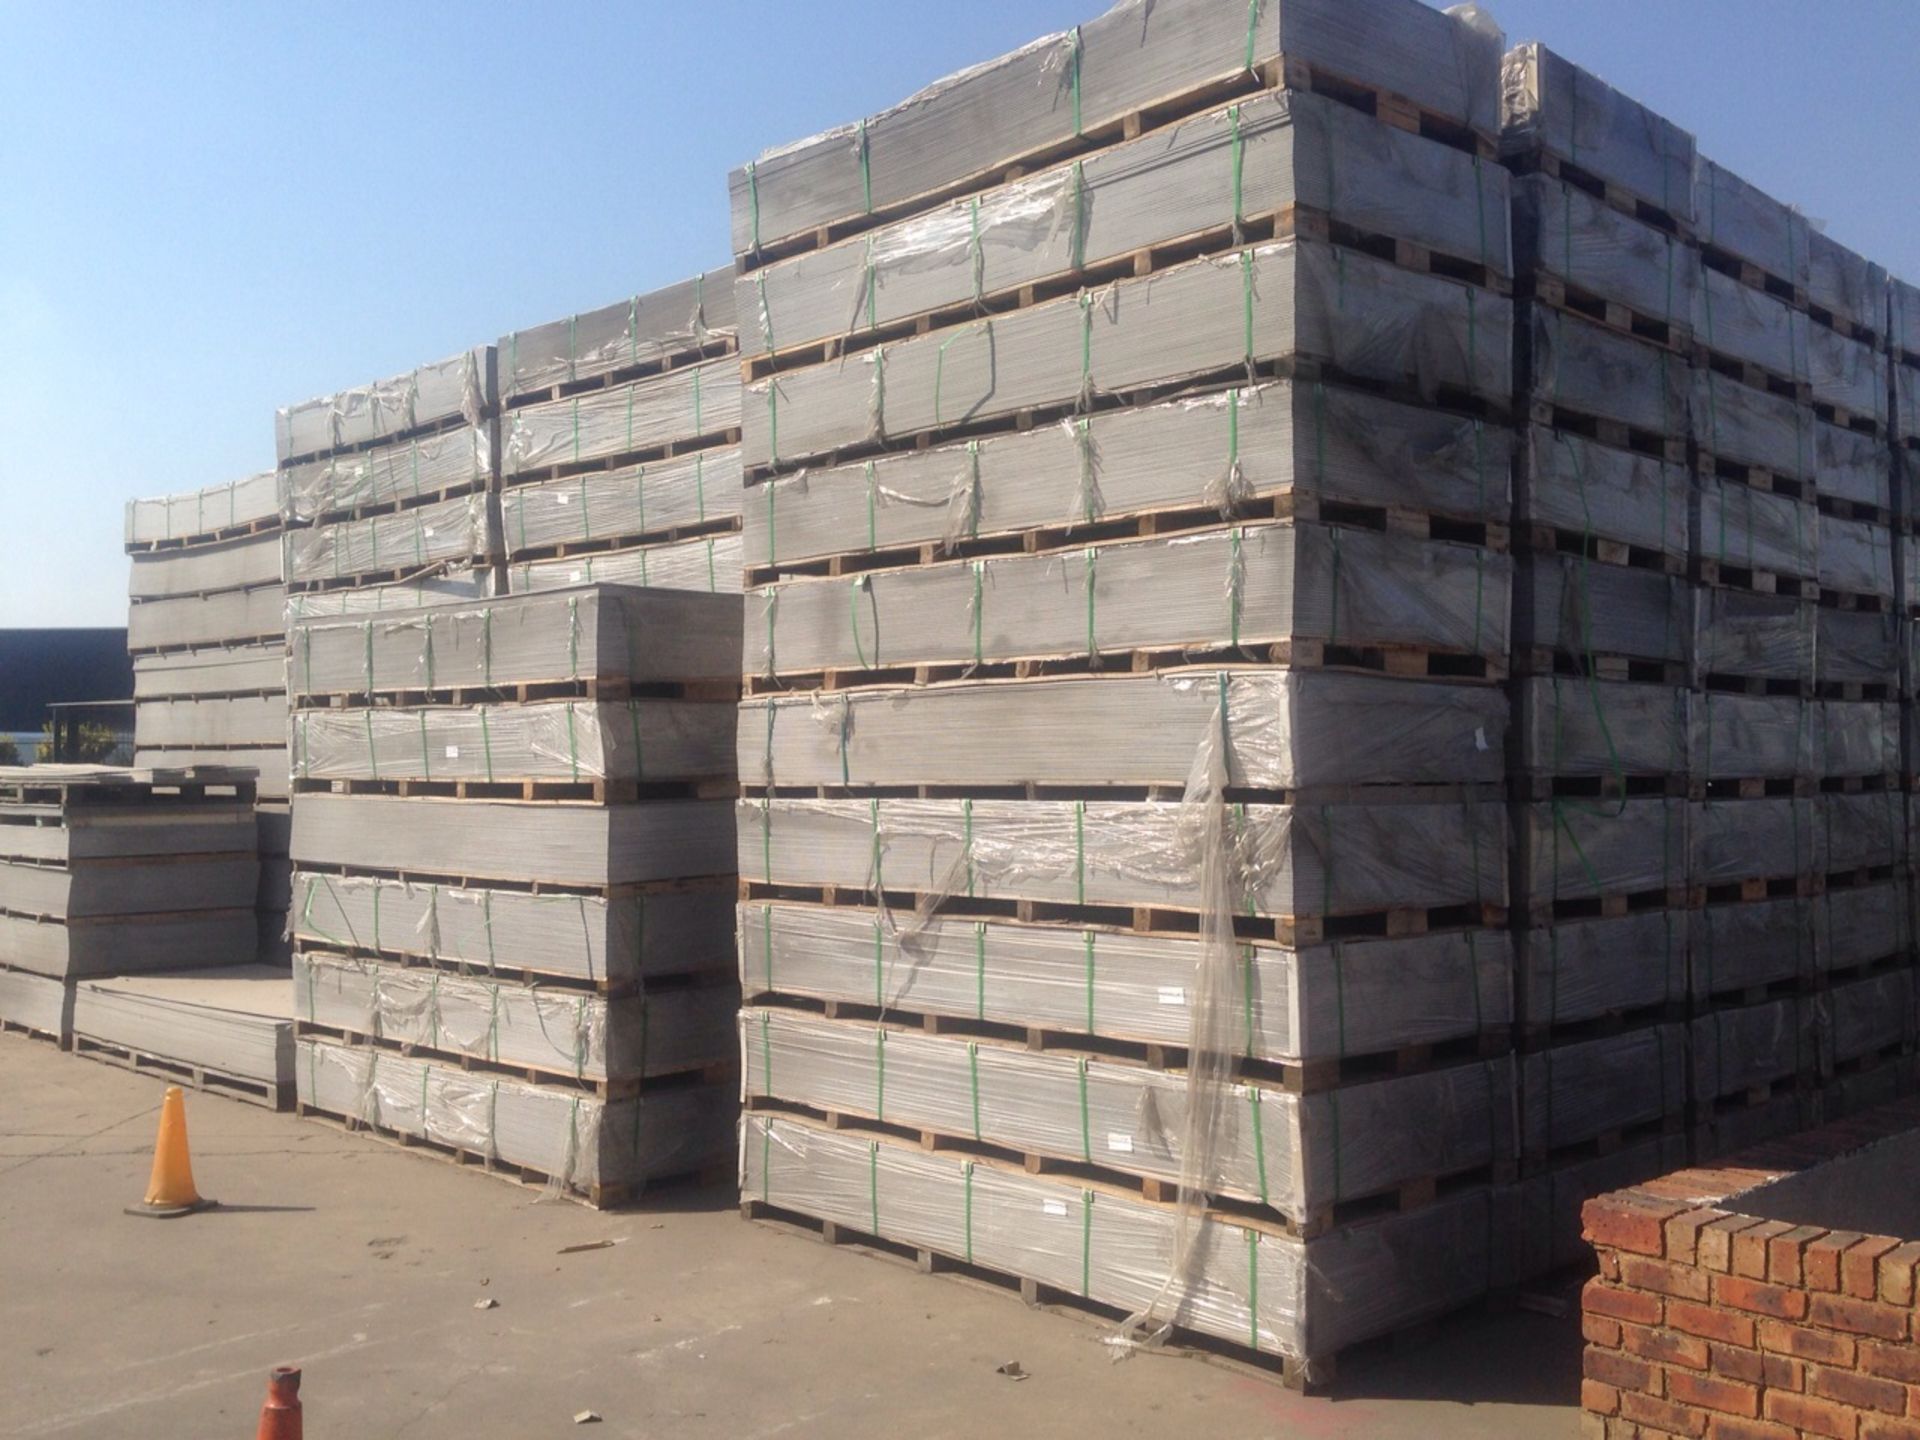 B GRADE FIBRE CEMENT BOARD 6MM TAPERED EDGE 3000 X 1200 (15 PALLETS - 50 BOARDS / PALLET) - Image 2 of 3